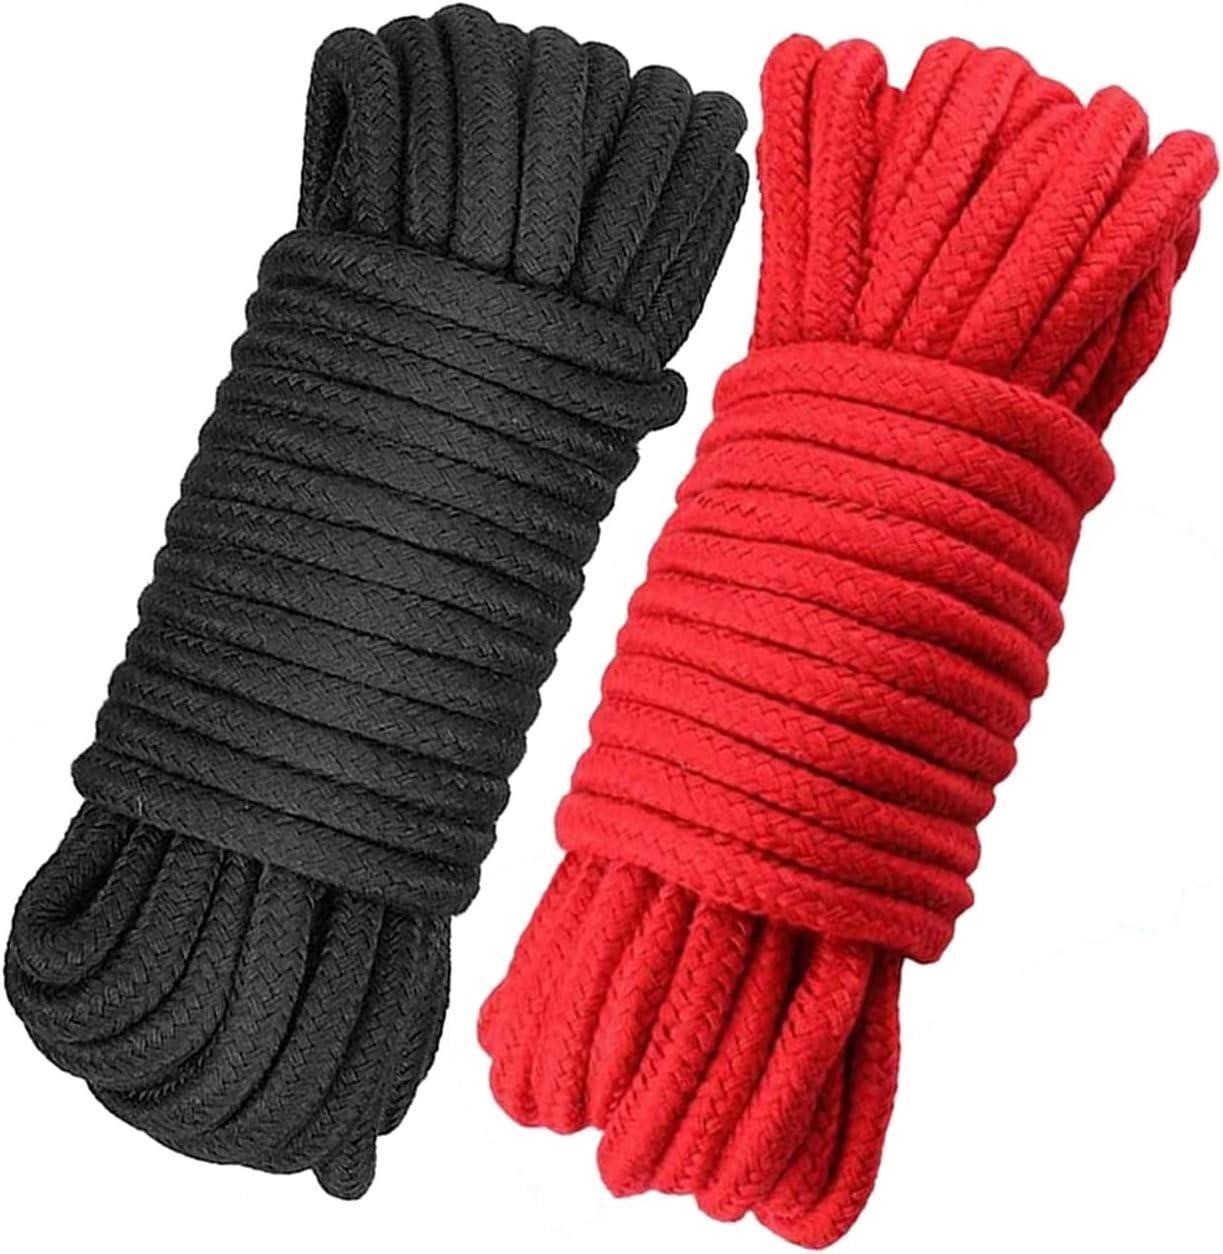 32ft Soft Cotton Rope 8mm - Black+Red